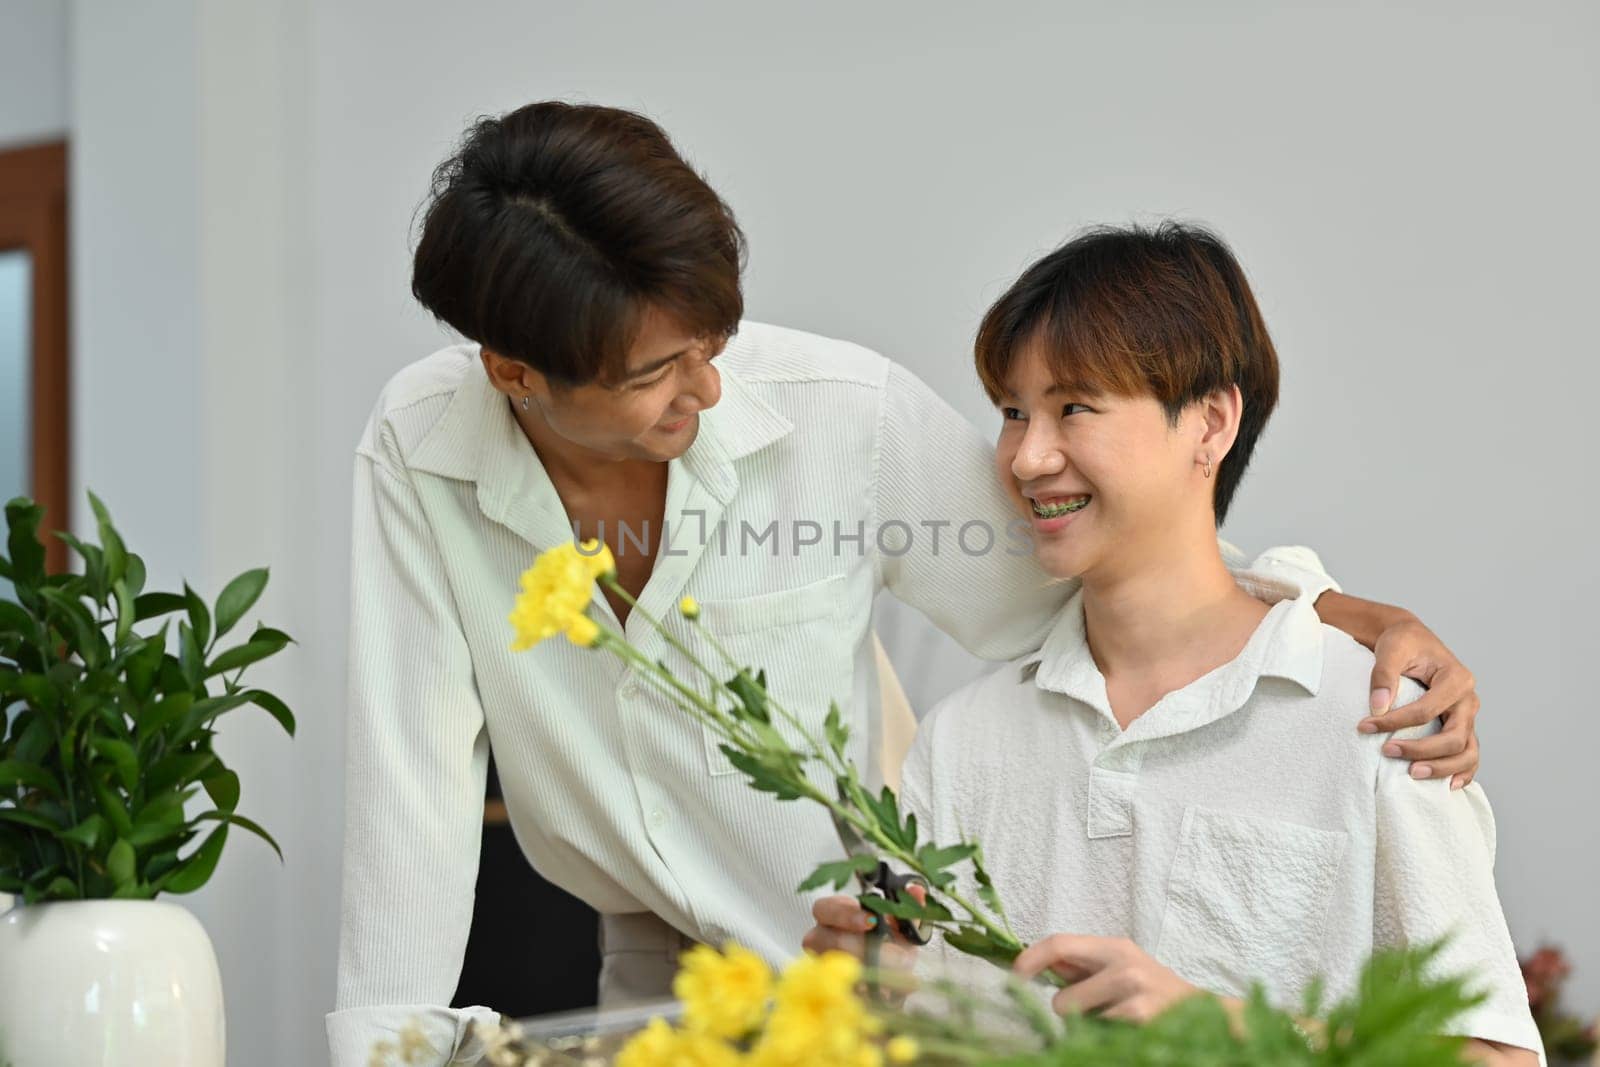 Affectionate romantic male gay couple spending time together, enjoying arranging flowers in cozy home. LGBT, homosexual and love.